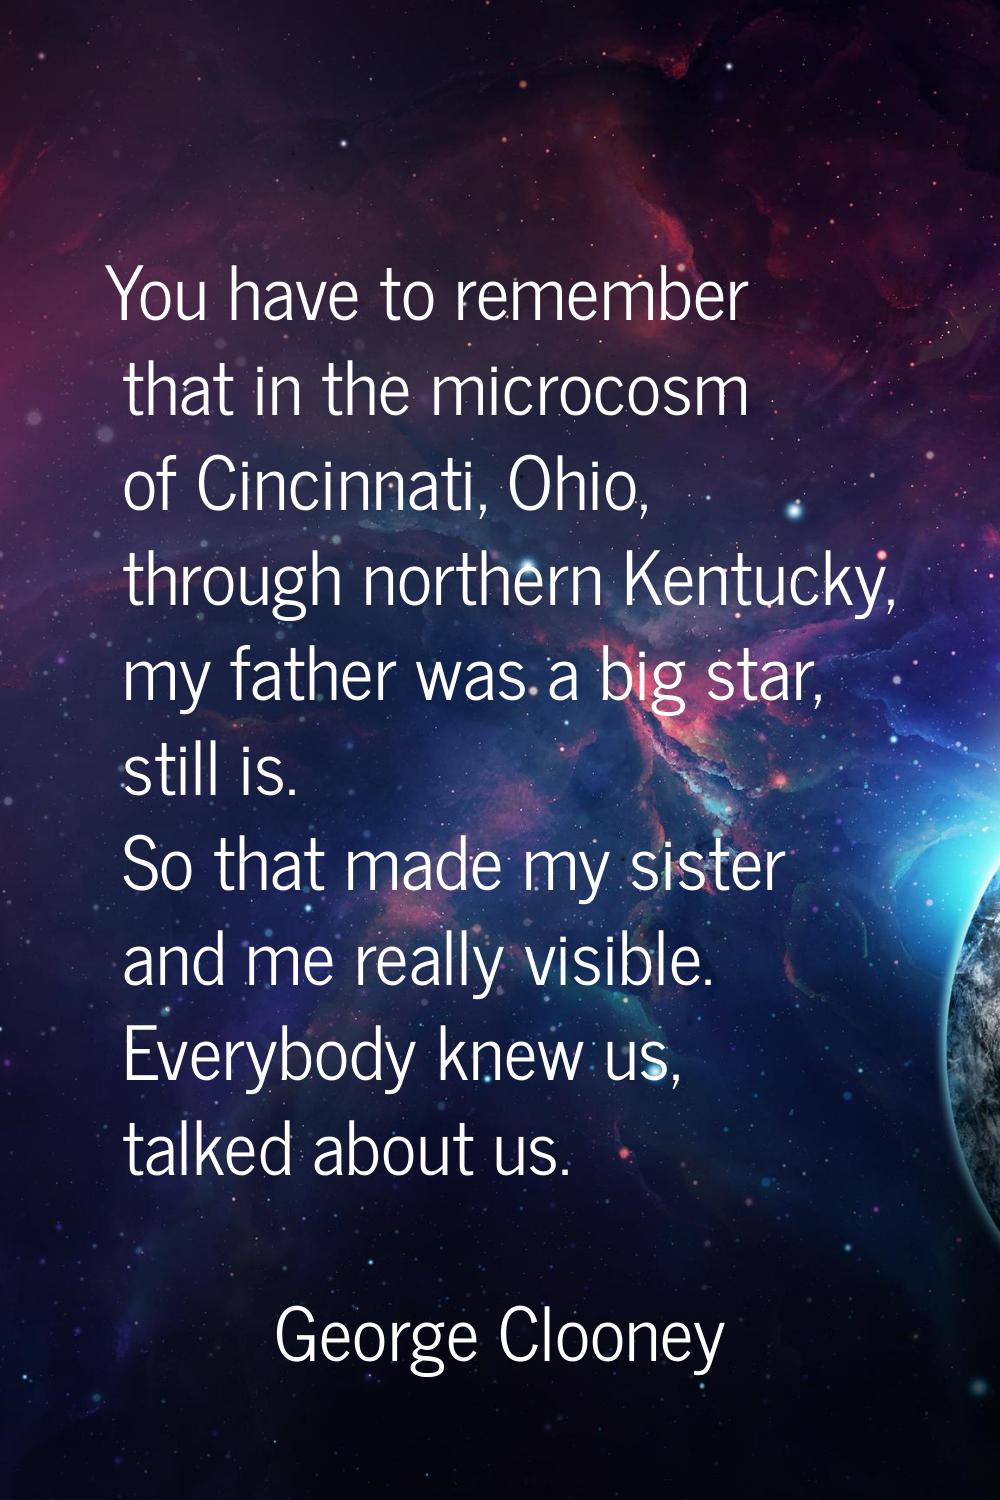 You have to remember that in the microcosm of Cincinnati, Ohio, through northern Kentucky, my fathe